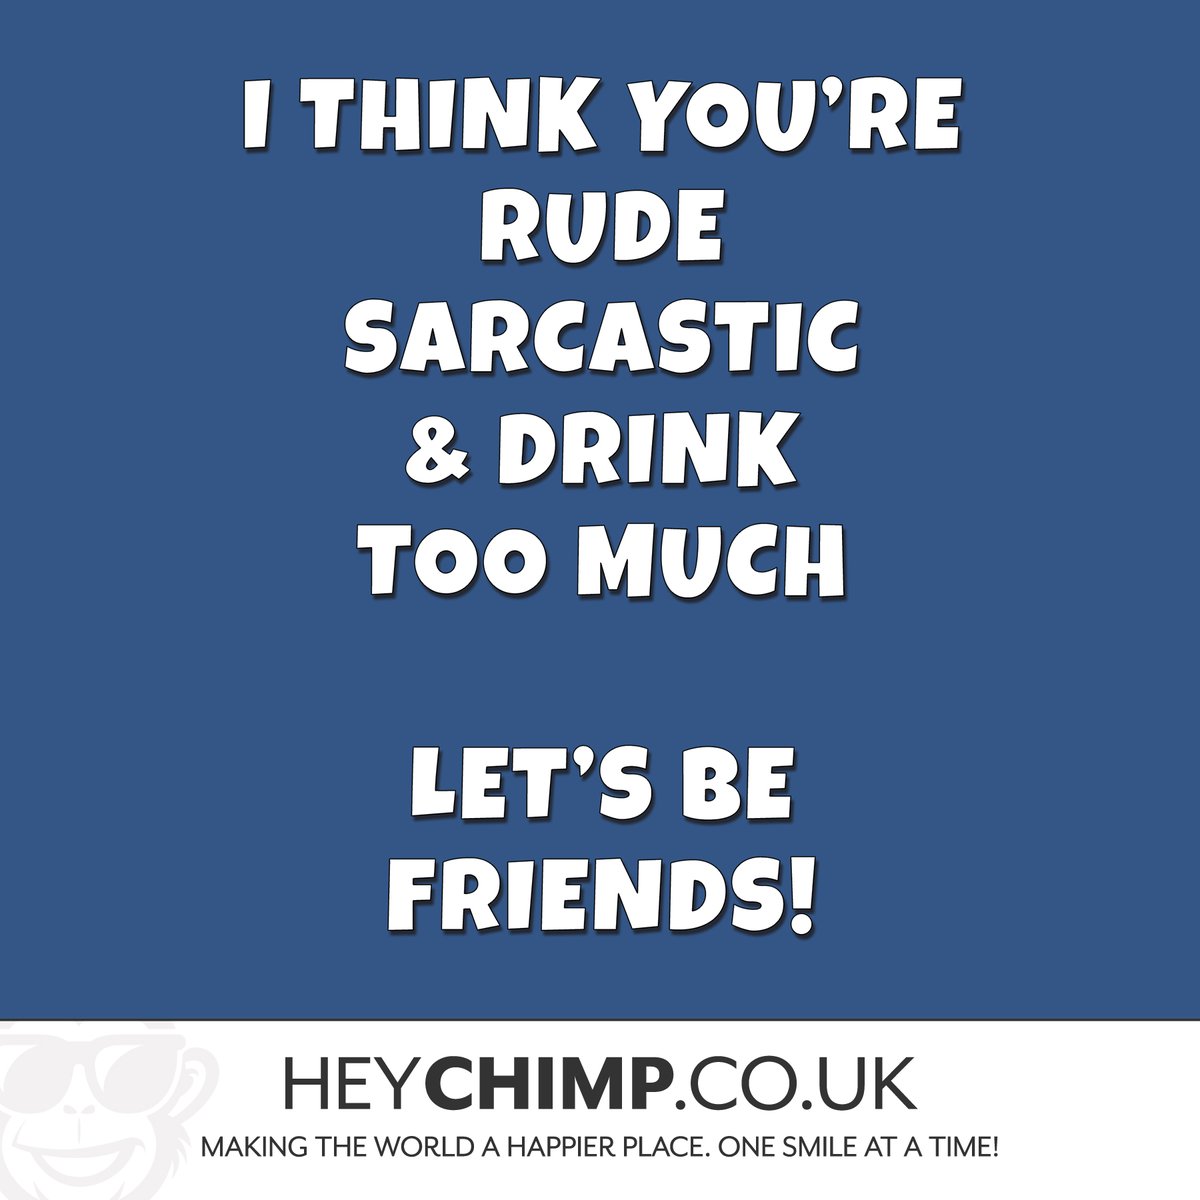 I think you're rude, sarcastic and drink too much
Let's be friends!

#familybusiness #sarcastic #sarcasticquotes #sarcastichumor #sarcasticmemes #sarcasticquote #sarcasticmom #sarcastica #sarcasticbitch #sarcasticmeme #sarcasticdad #sarcasticpost #sarcasticcards #sarcasticaf